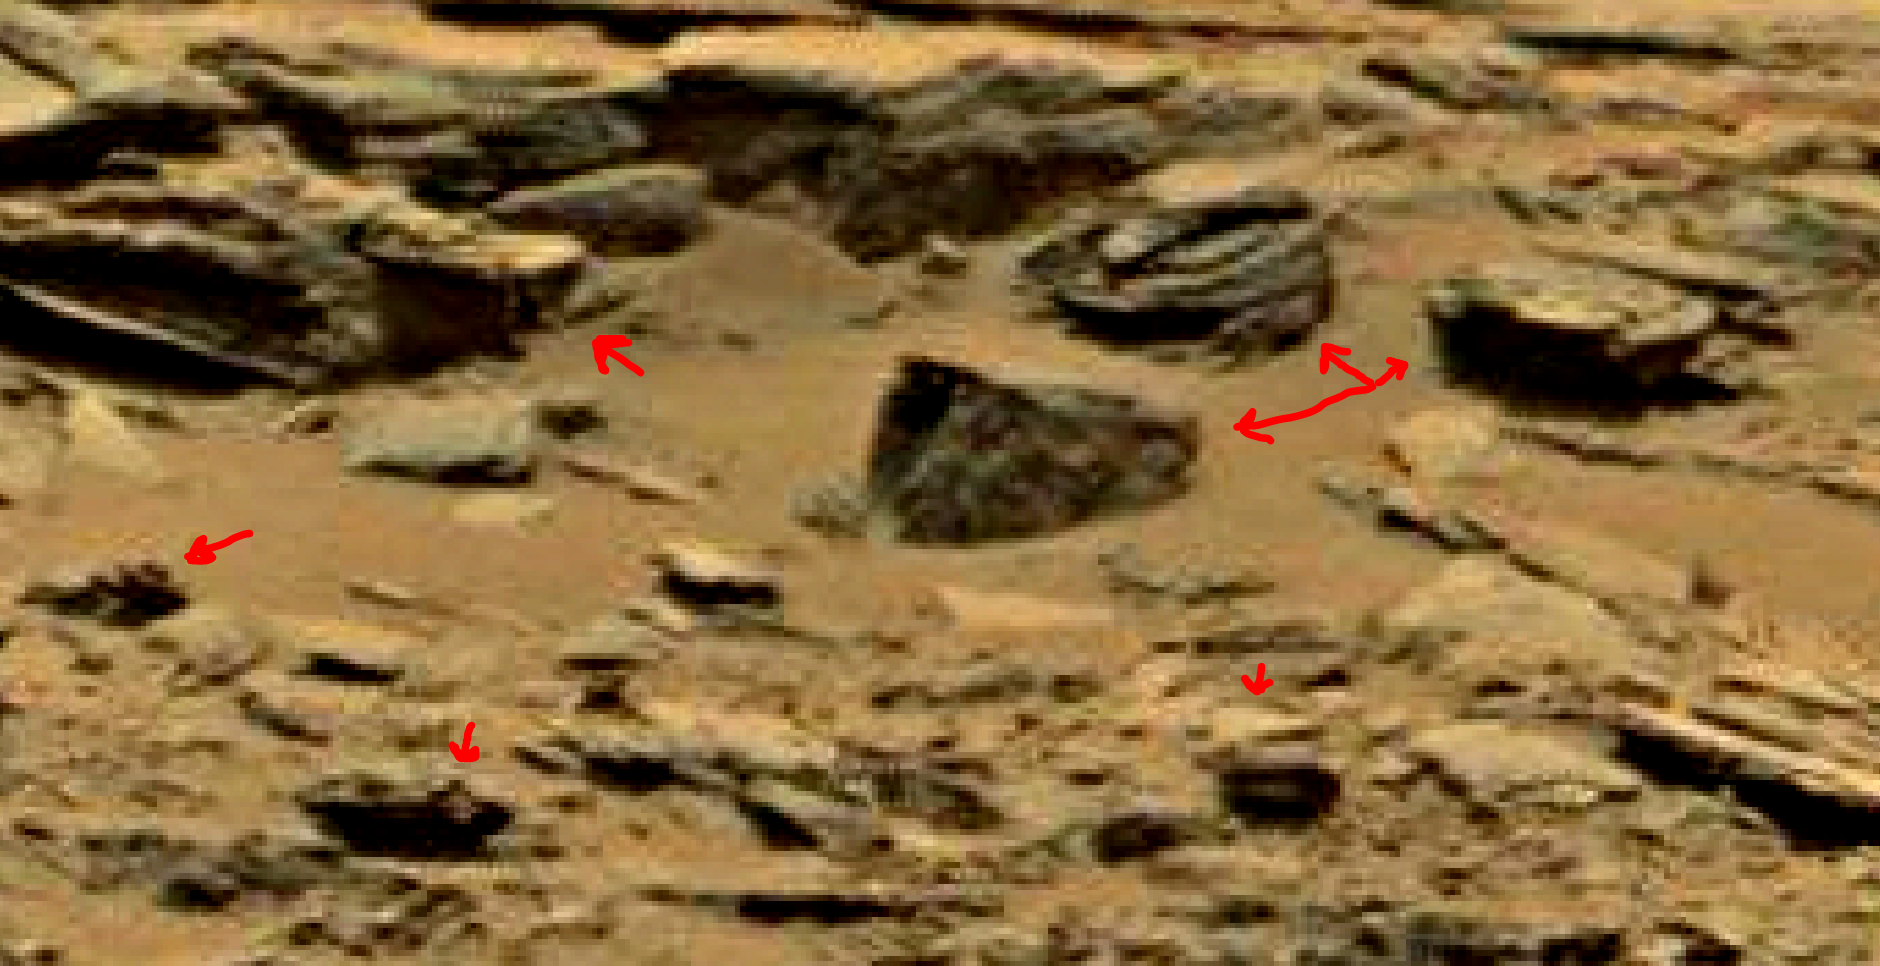 mars sol 1353 anomaly-artifacts 67 was life on mars